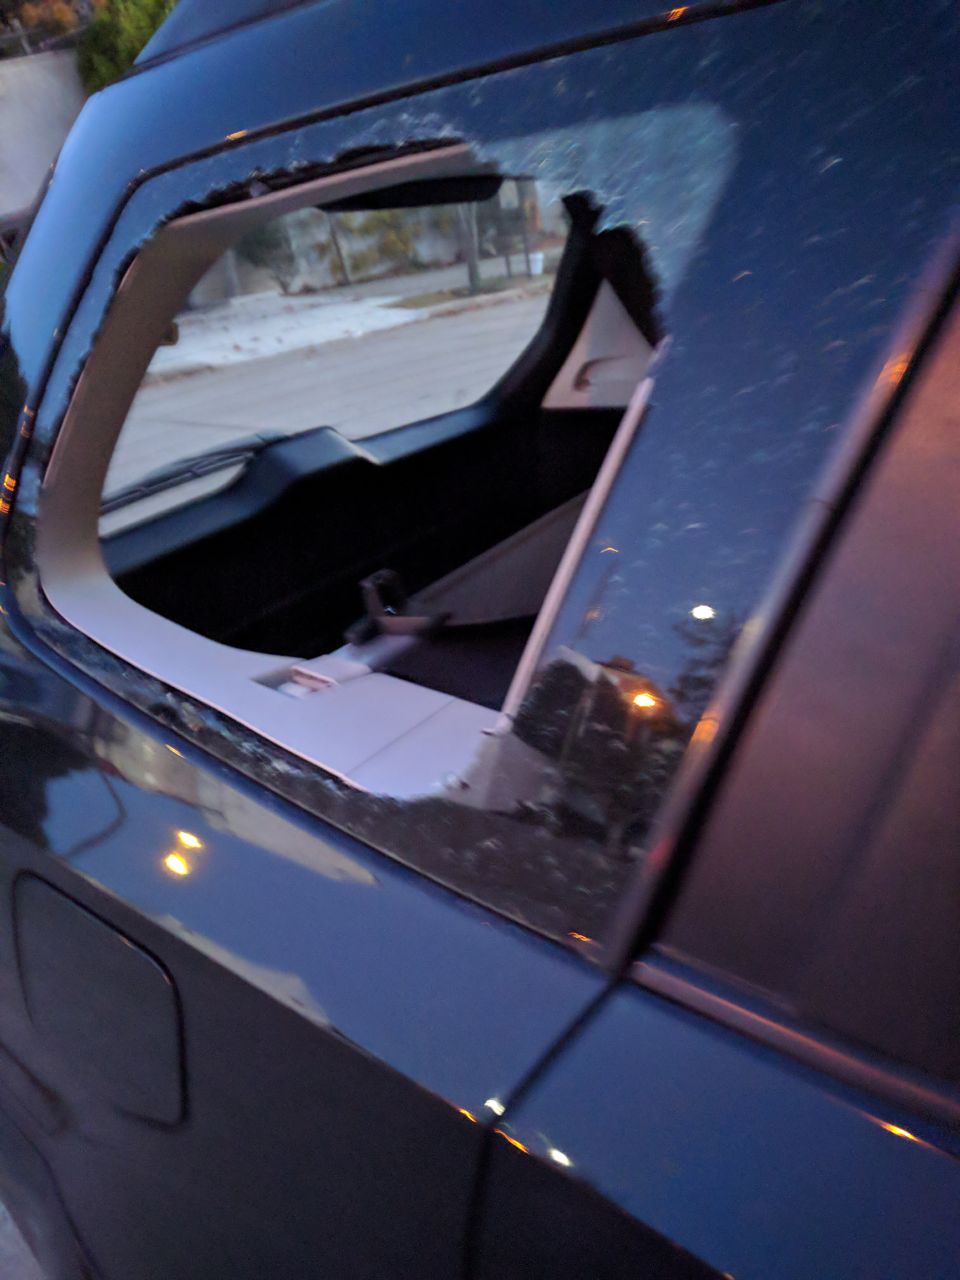 Photo of the rear, passenger side, window of this car owned by a member of The Brokers Guild that was smashed a few hours after the cease and desist letters were announced by Cleaningress.